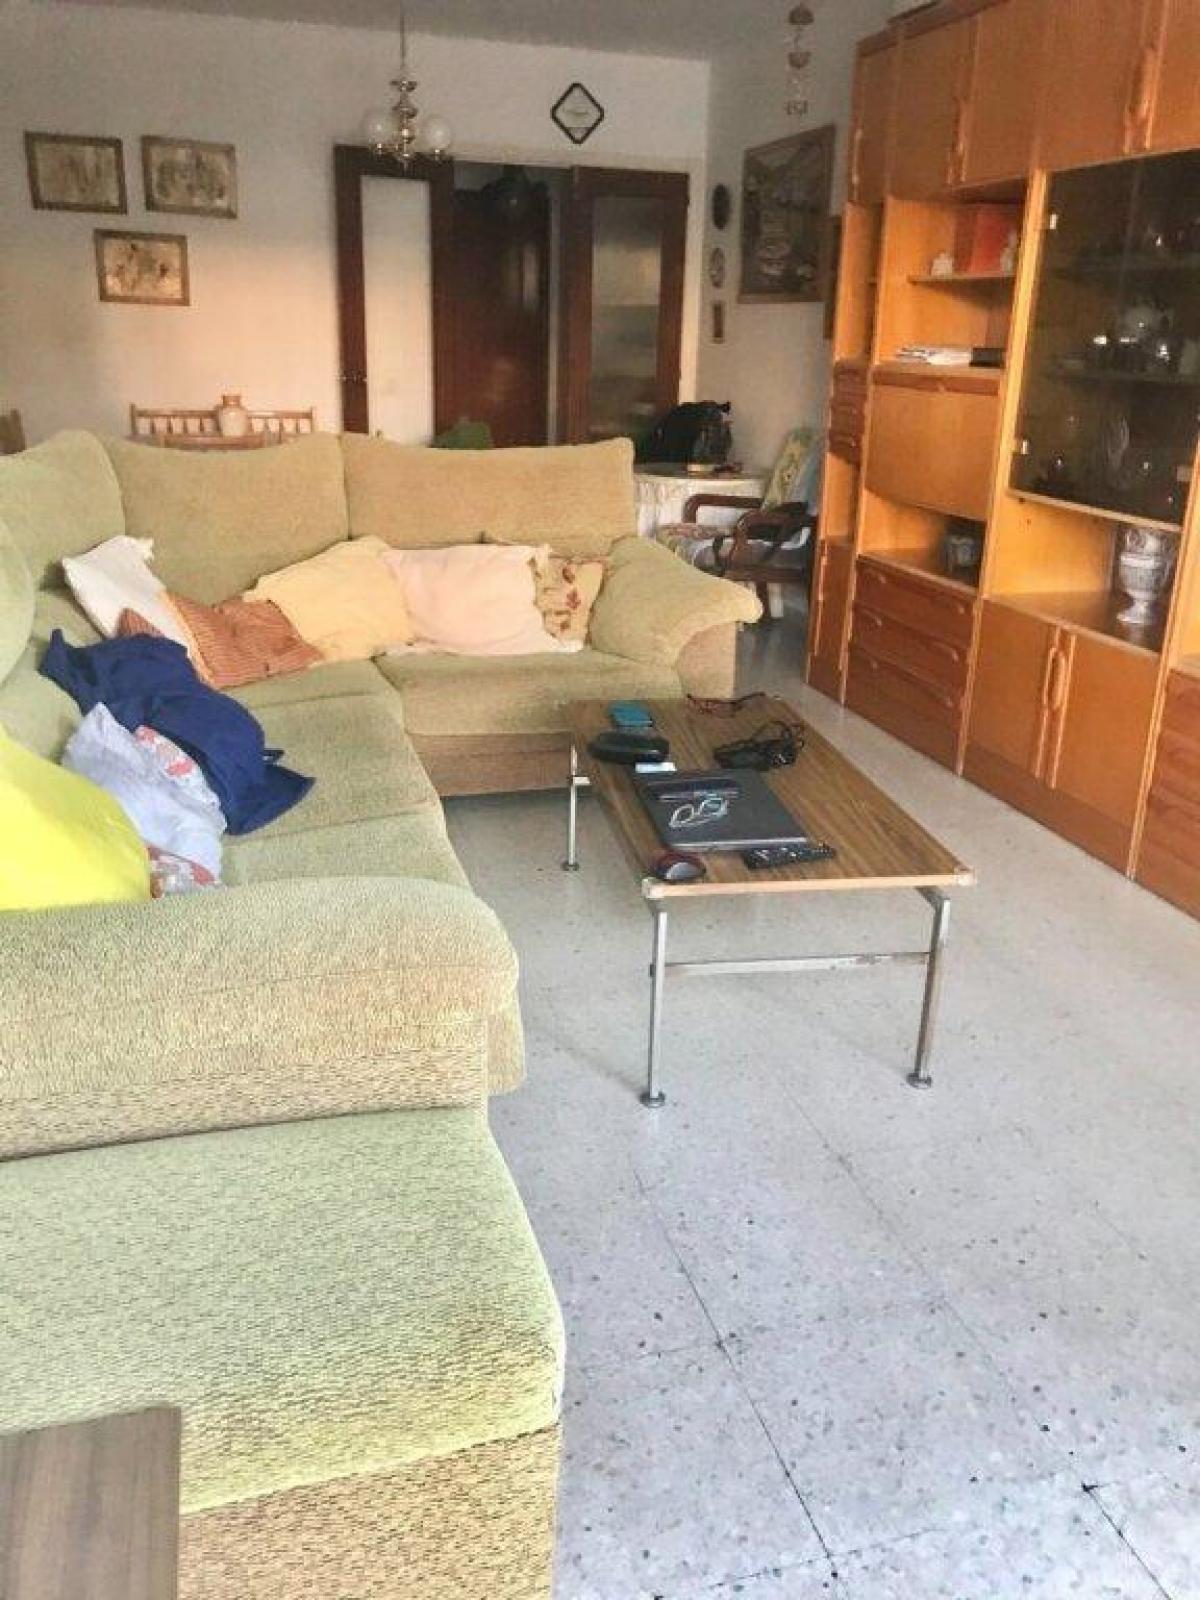 Picture of Apartment For Sale in Fuengirola, Malaga, Spain